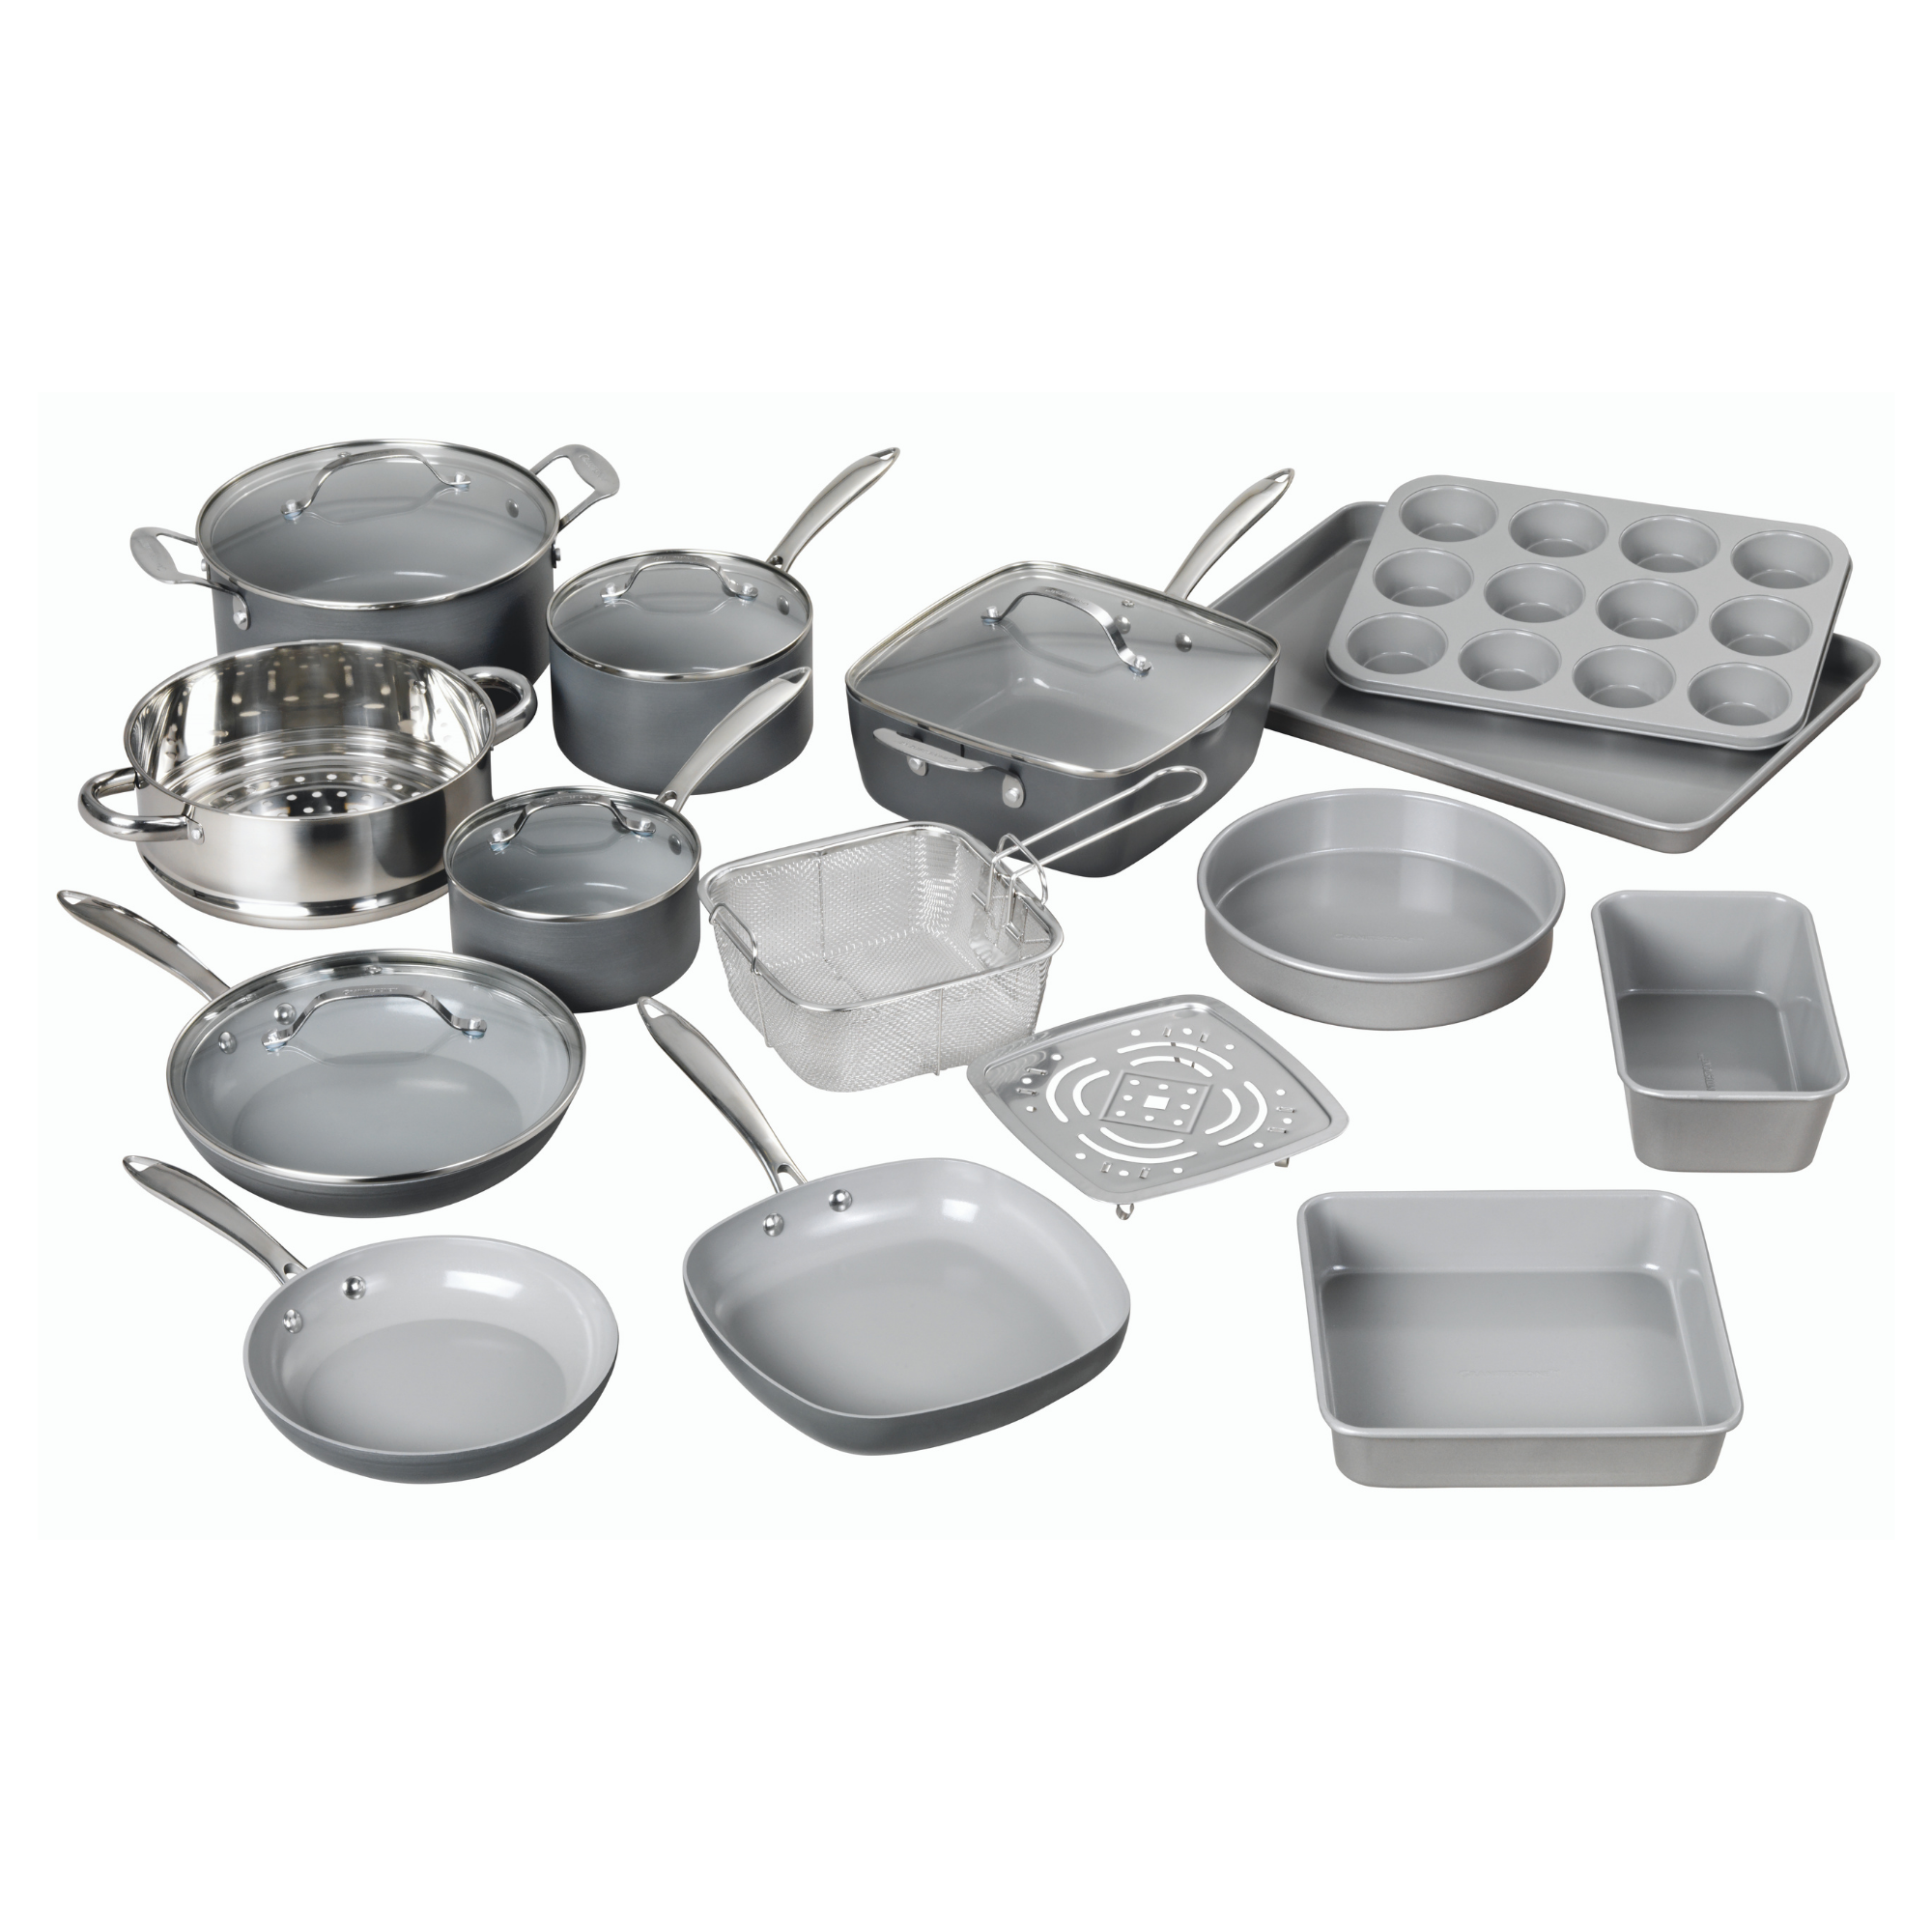 Granite Stone Pro Hard Anodized 20-pc. Nonstick Cookware and Bakeware Set, One Size